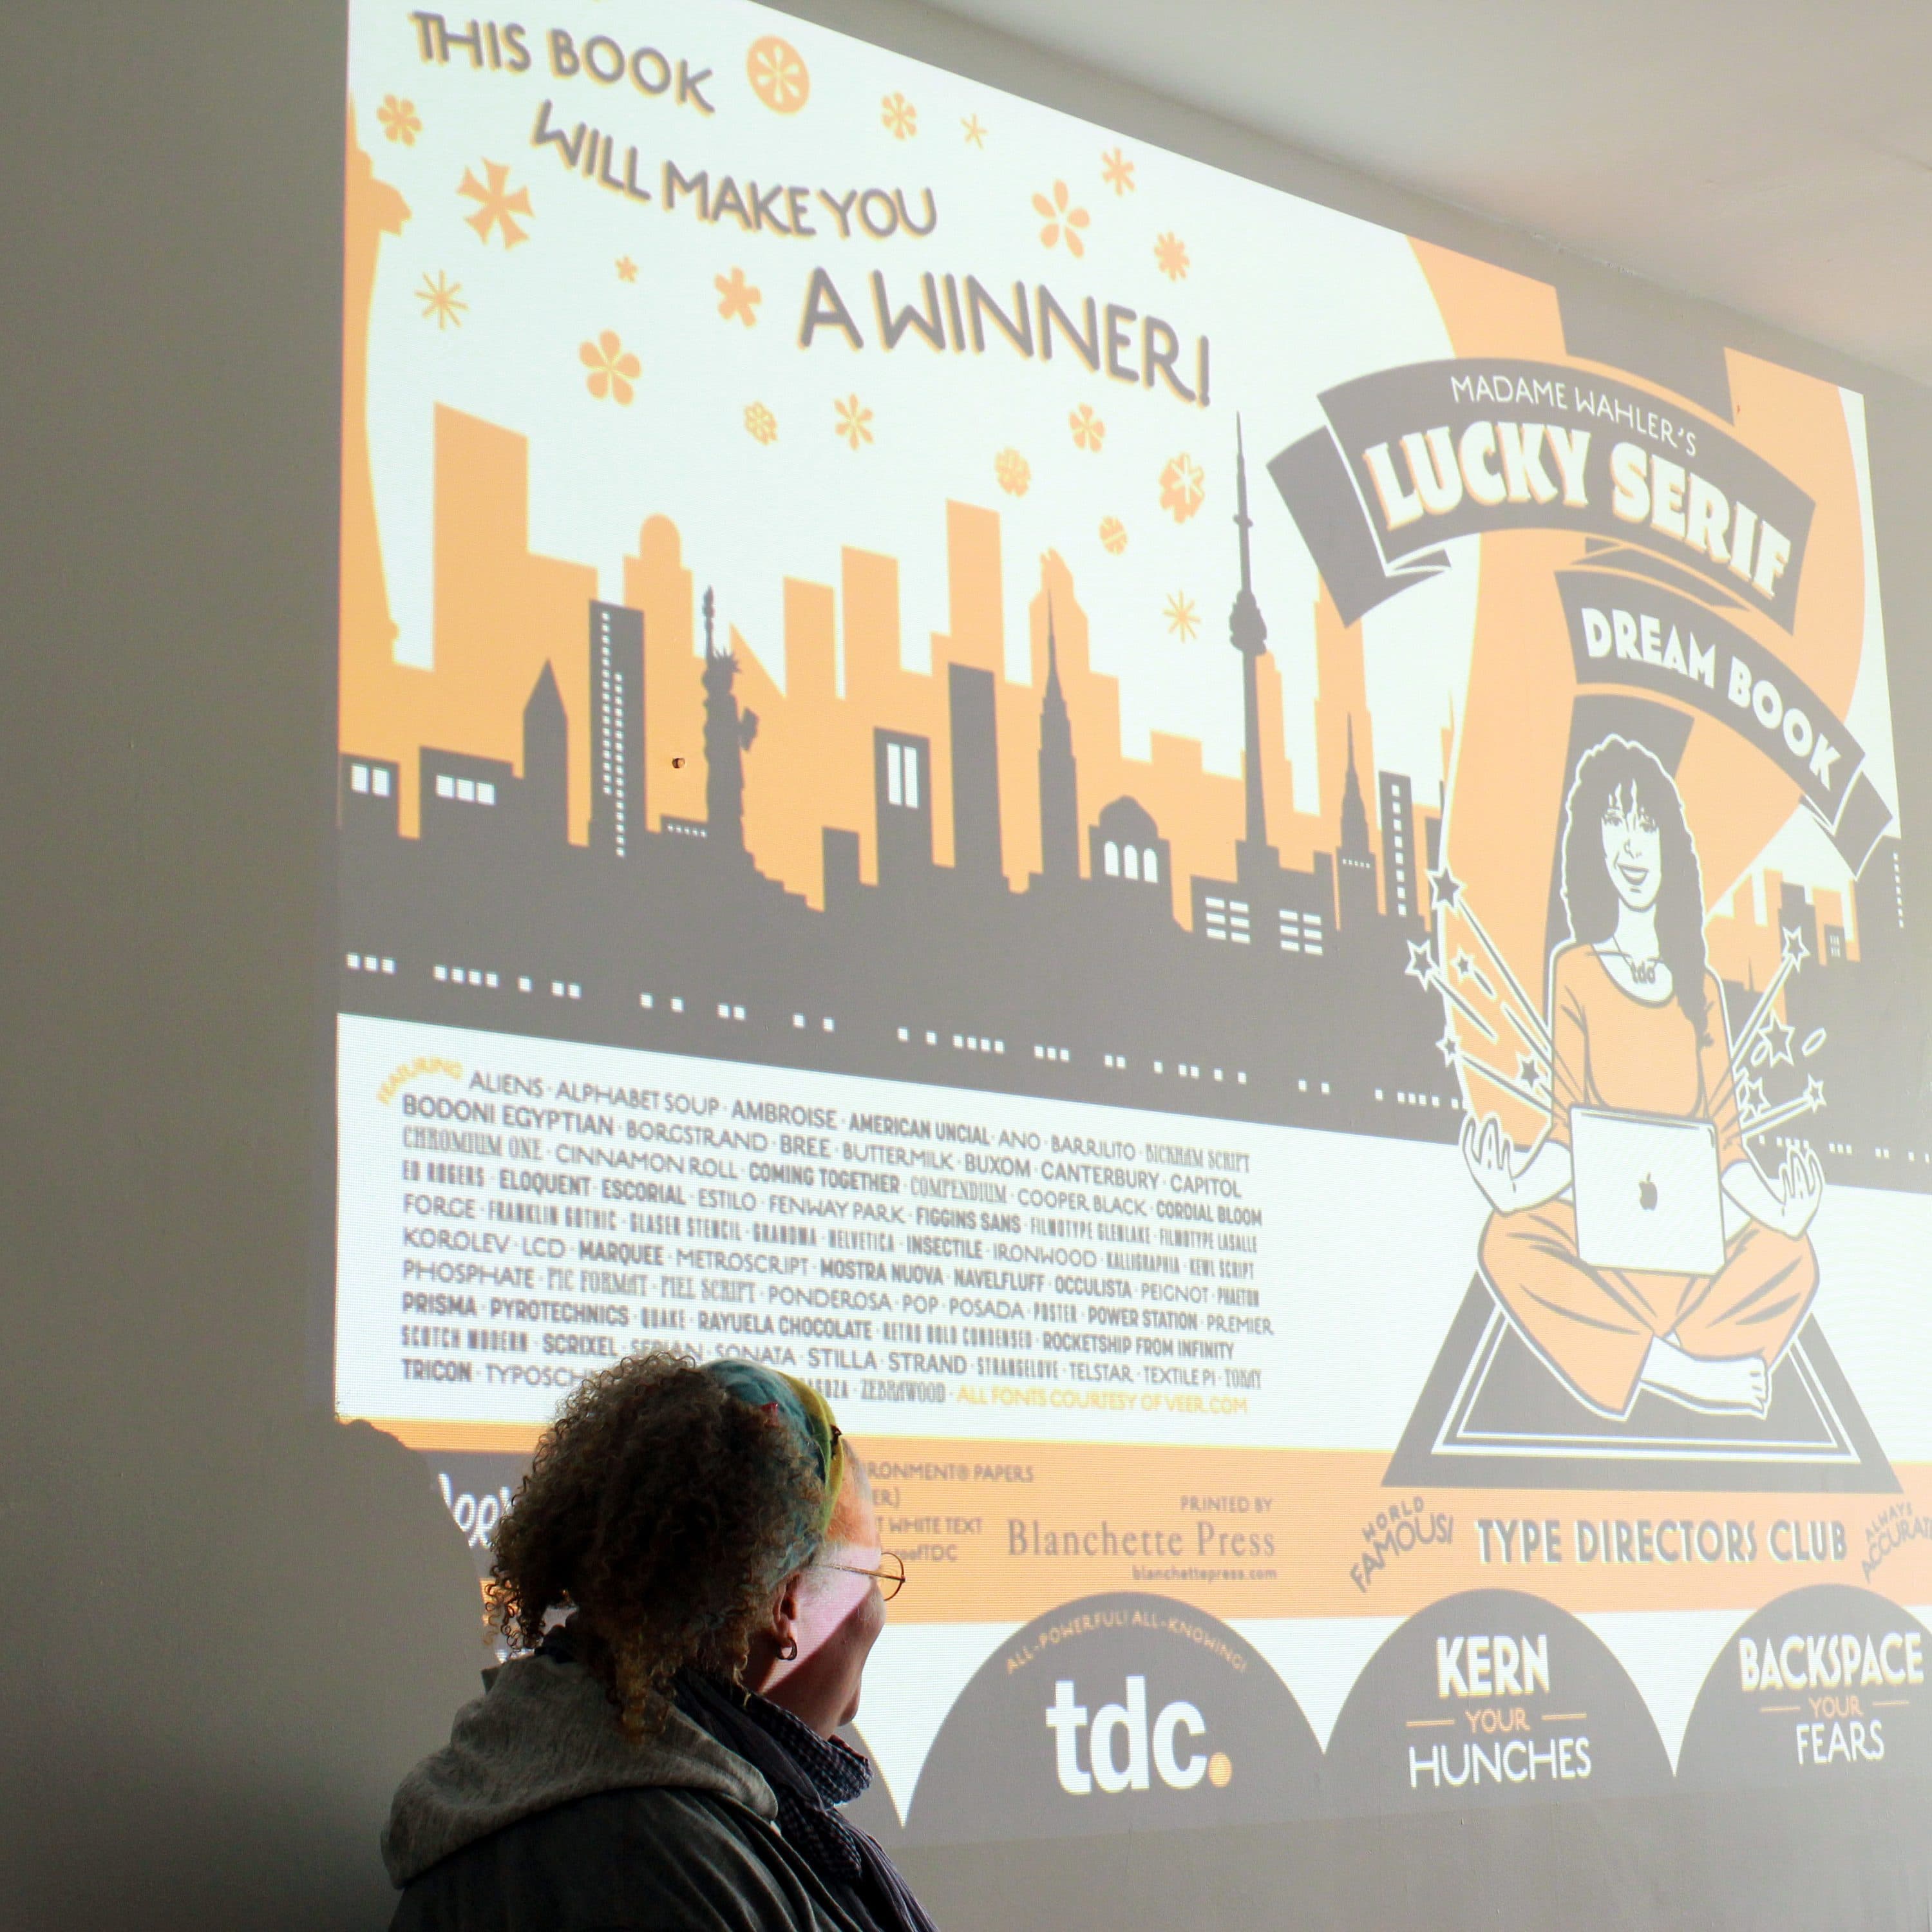 A person with curly hair is pointing at a projected image on a white wall. The image is a promotional poster in orange, black, and white for a book titled "Madame Hample's Lucky Serif Dream Book," featuring a stylized cityscape and a seated figure with a laptop.